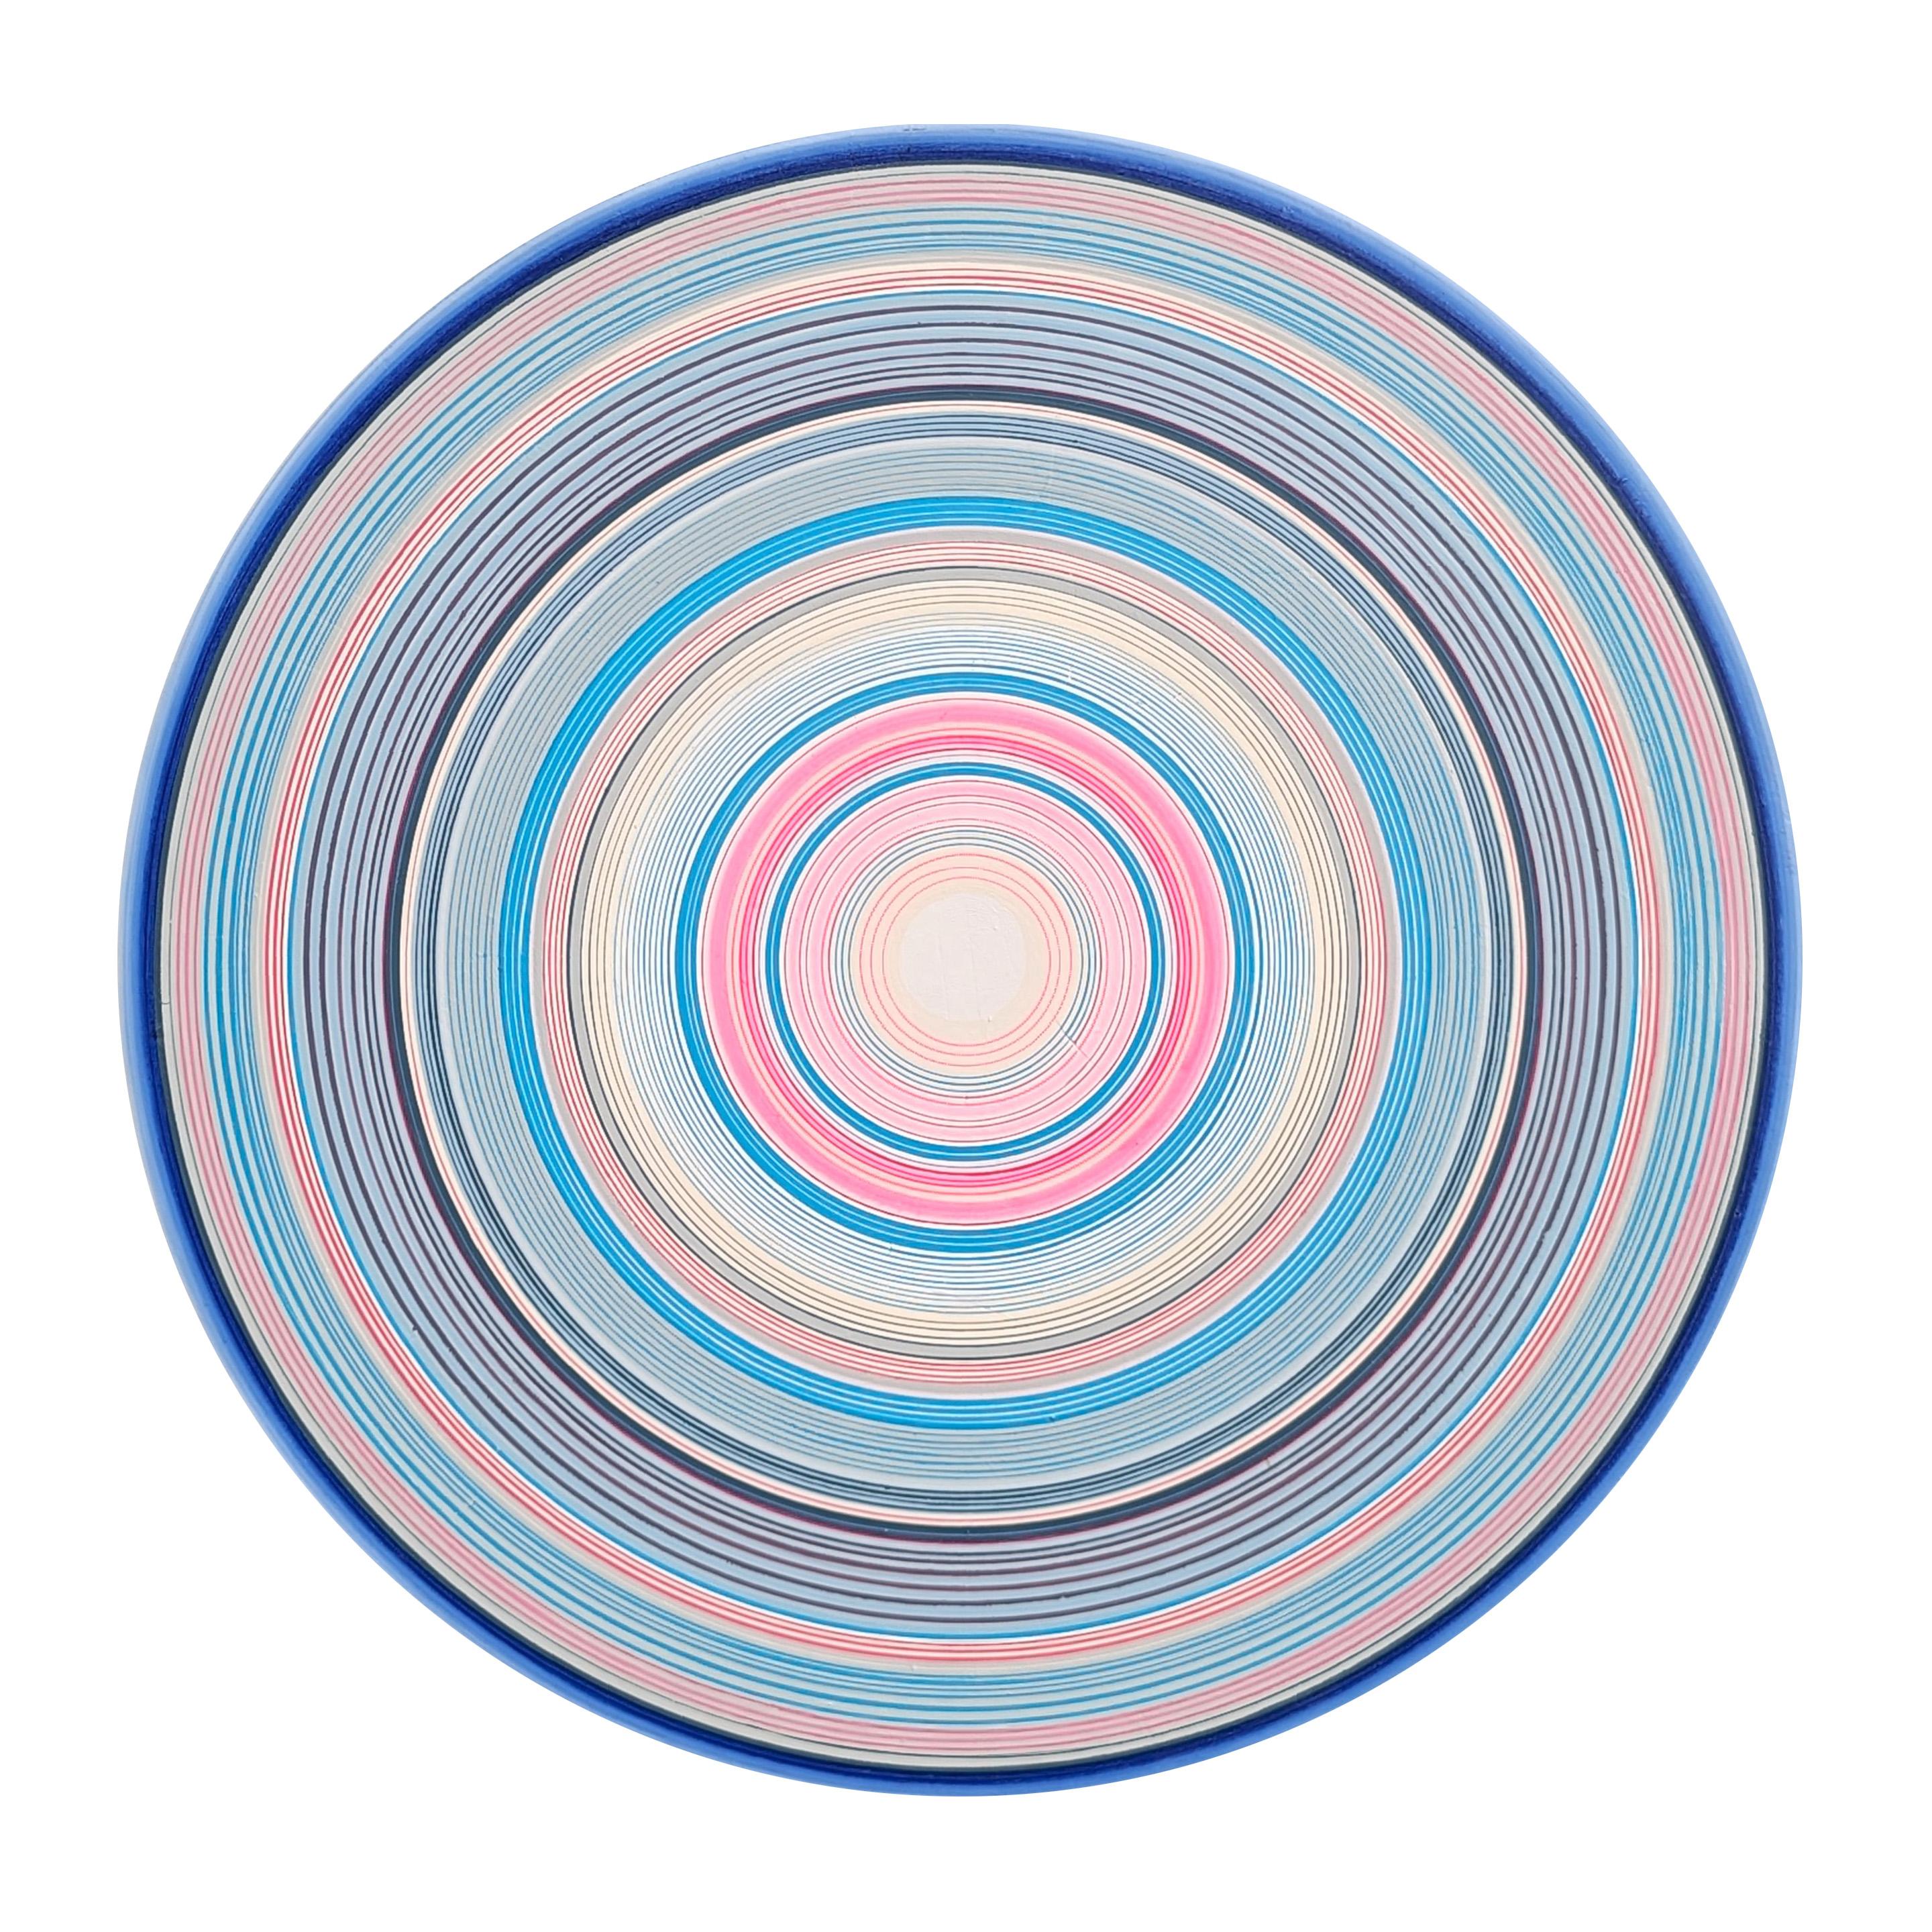 "Threads" Contemporary Abstract Blue, Pink, & White Concentric Circle Painting - Mixed Media Art by David Hardaker